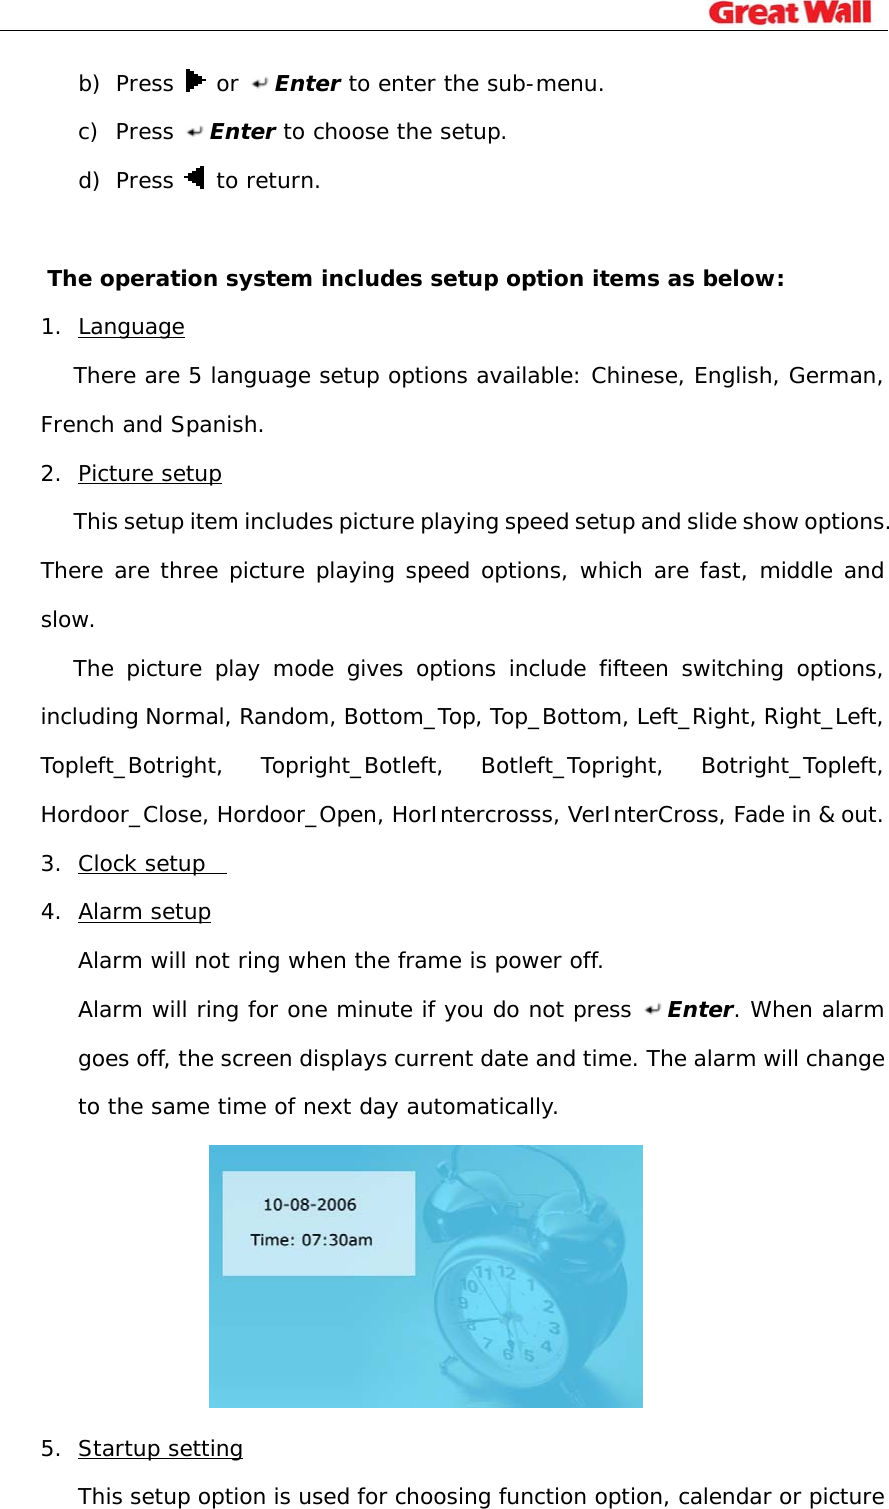                                                                              b) Press   or Enter to enter the sub-menu. c) Press  Enter to choose the setup.  d) Press   to return.  The operation system includes setup option items as below: 1. Language There are 5 language setup options available: Chinese, English, German, French and Spanish. 2. Picture setup       This setup item includes picture playing speed setup and slide show options. There are three picture playing speed options, which are fast, middle and slow.  The picture play mode gives options include fifteen switching options, including Normal, Random, Bottom_Top, Top_Bottom, Left_Right, Right_Left, Topleft_Botright, Topright_Botleft, Botleft_Topright, Botright_Topleft, Hordoor_Close, Hordoor_Open, HorIntercrosss, VerInterCross, Fade in &amp; out.   3. Clock setup   4. Alarm setup Alarm will not ring when the frame is power off.  Alarm will ring for one minute if you do not press  Enter. When alarm goes off, the screen displays current date and time. The alarm will change to the same time of next day automatically.   5. Startup setting This setup option is used for choosing function option, calendar or picture 